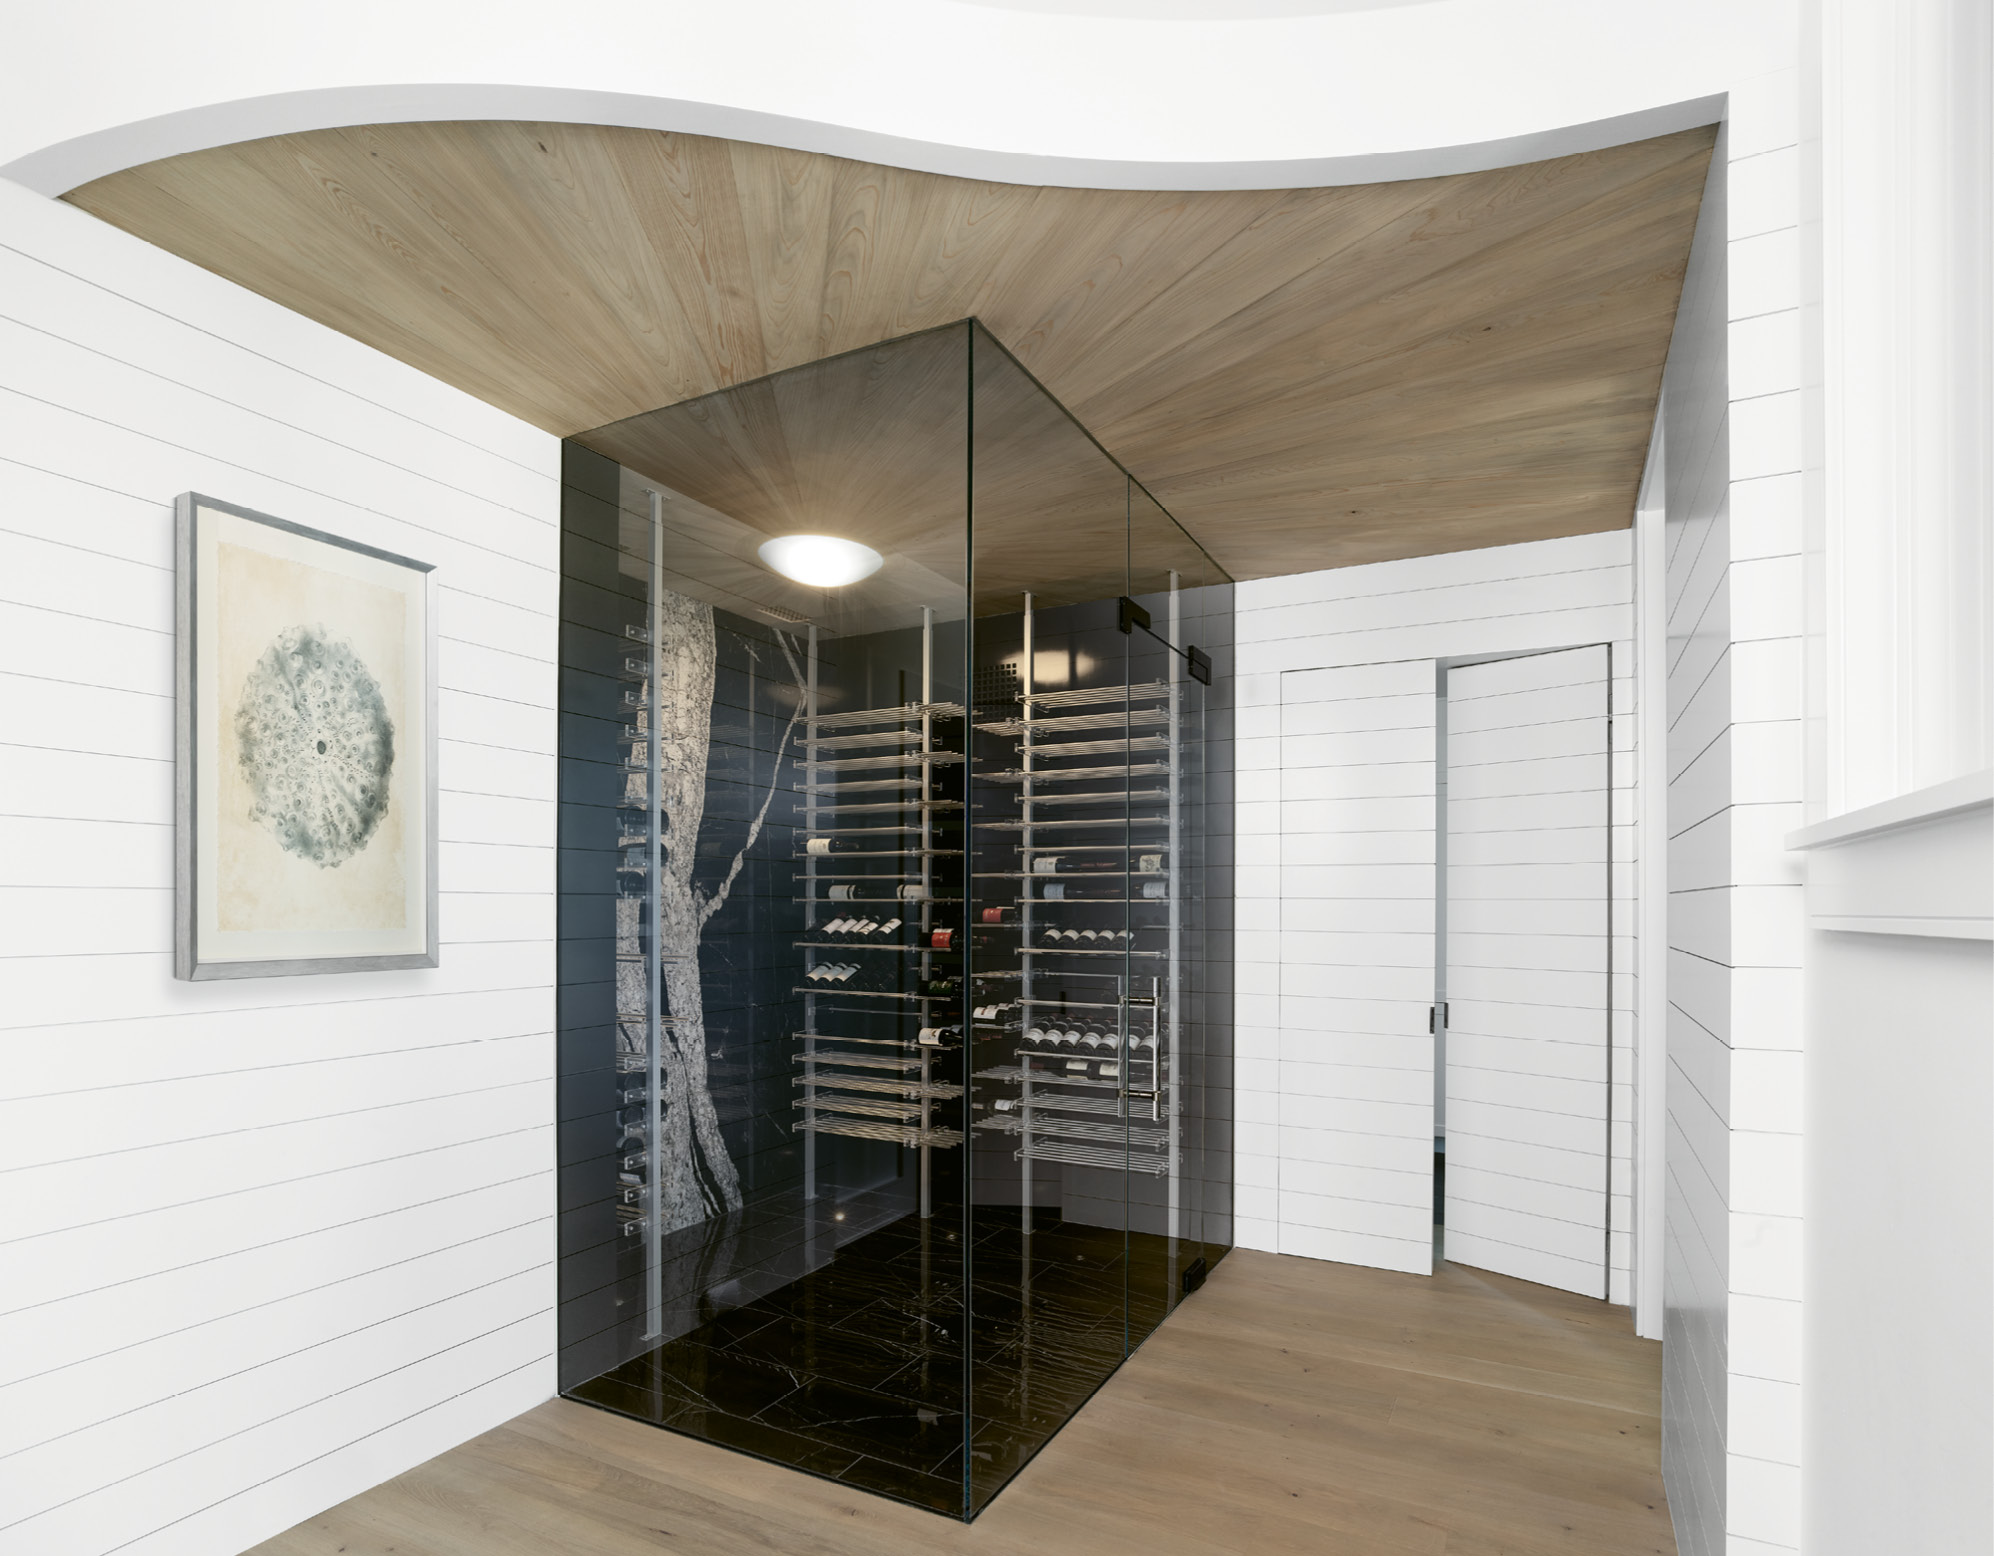 The wine room features frameless glass doors, acrylic and anodized aluminum racks, and its own HVAC system. A granite slab covers the back wall for a dramatic statement, and a vintage light fixture anchors a corner from which cypress planks radiate.